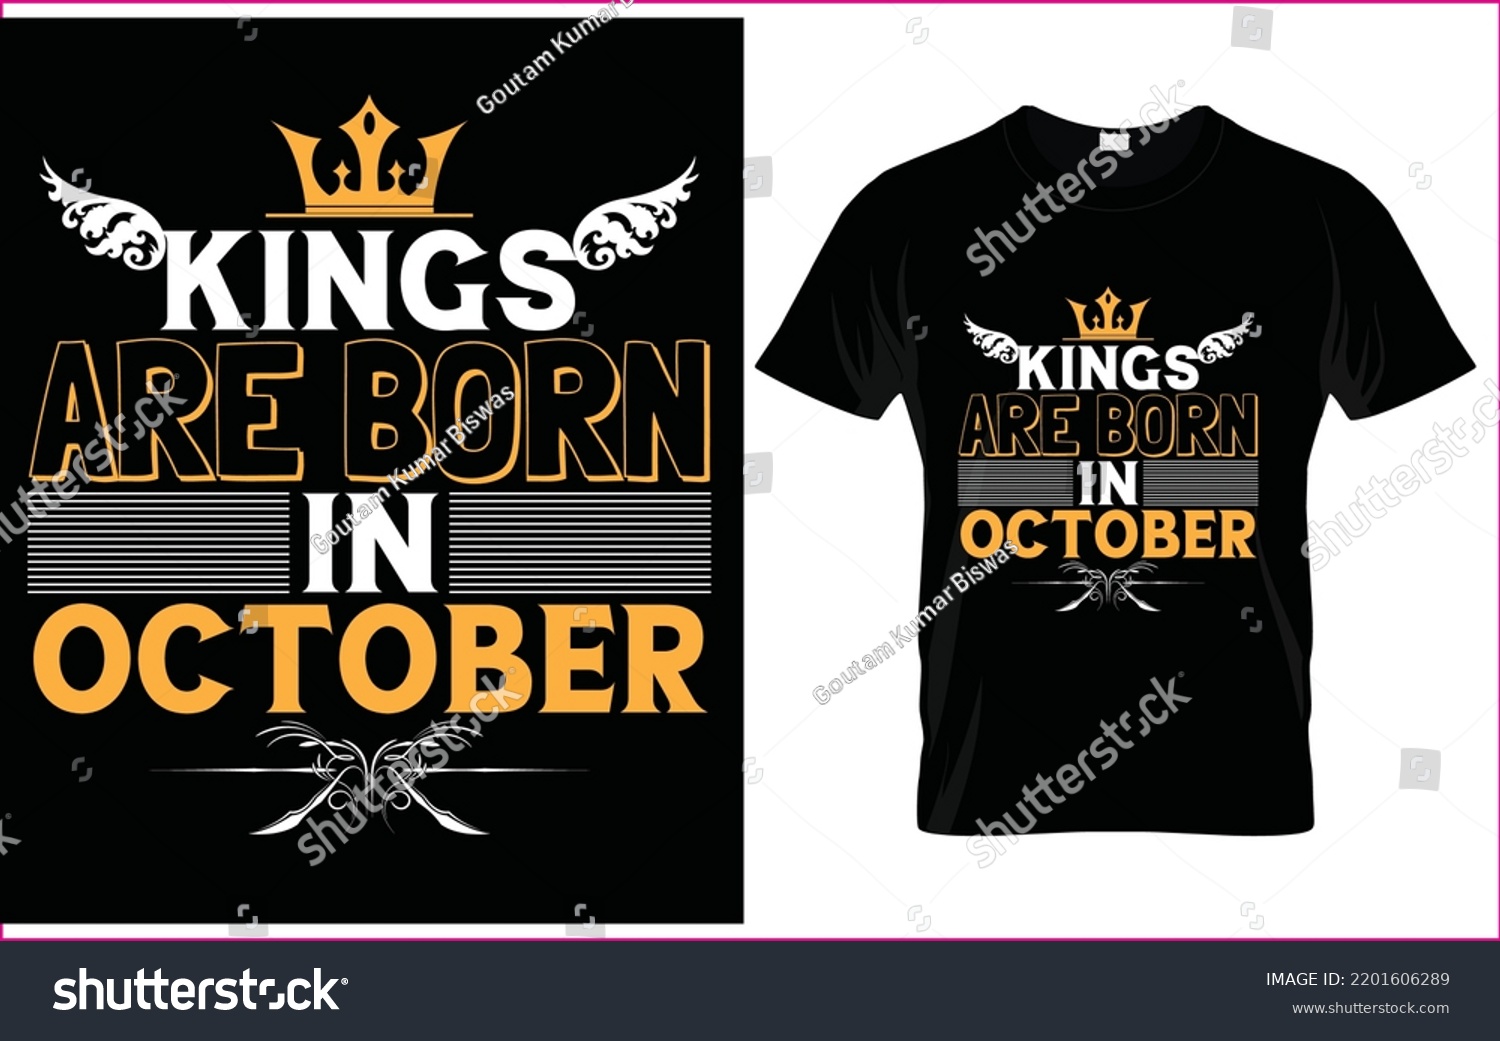 SVG of Kings are born in October tshirt desgin template vector for tshirt printing.  svg